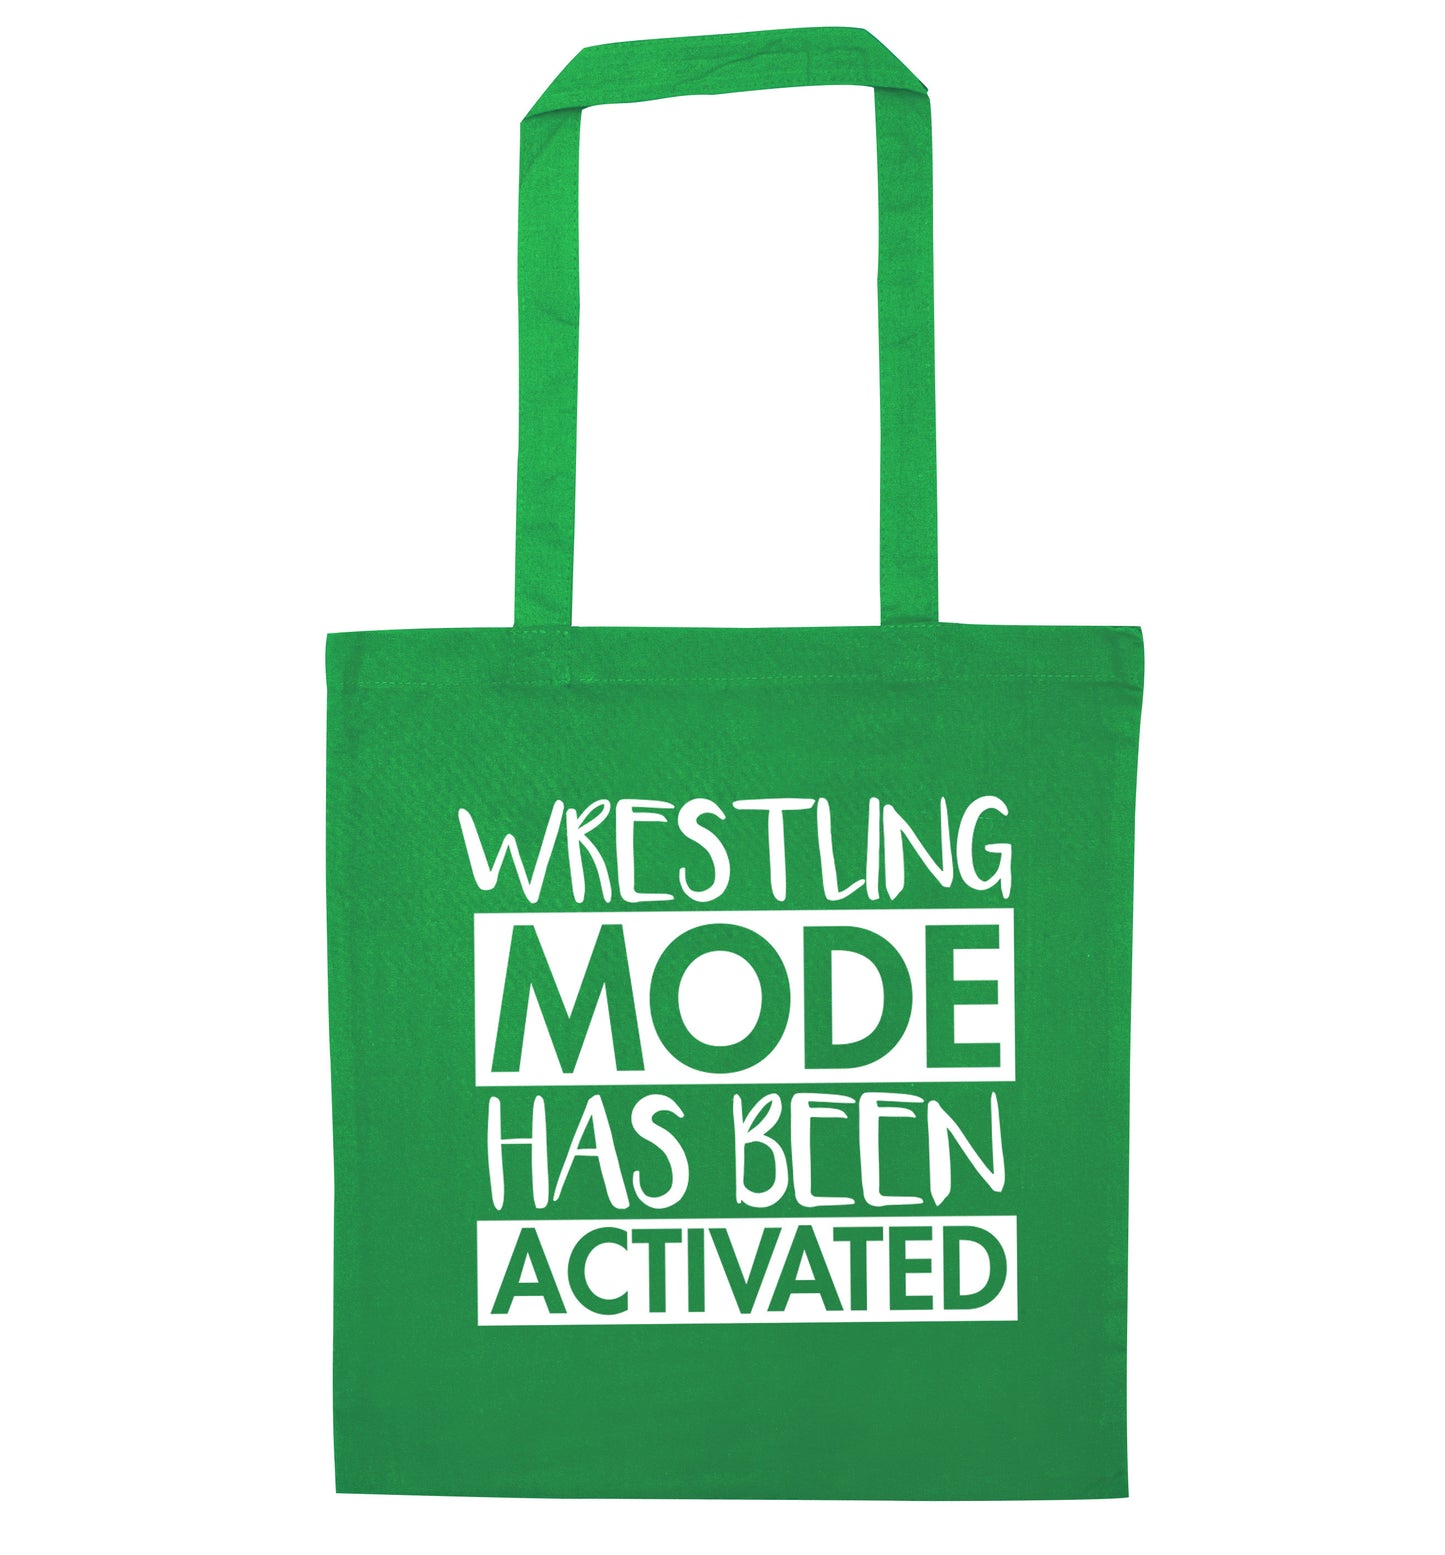 Wresting mode activated green tote bag